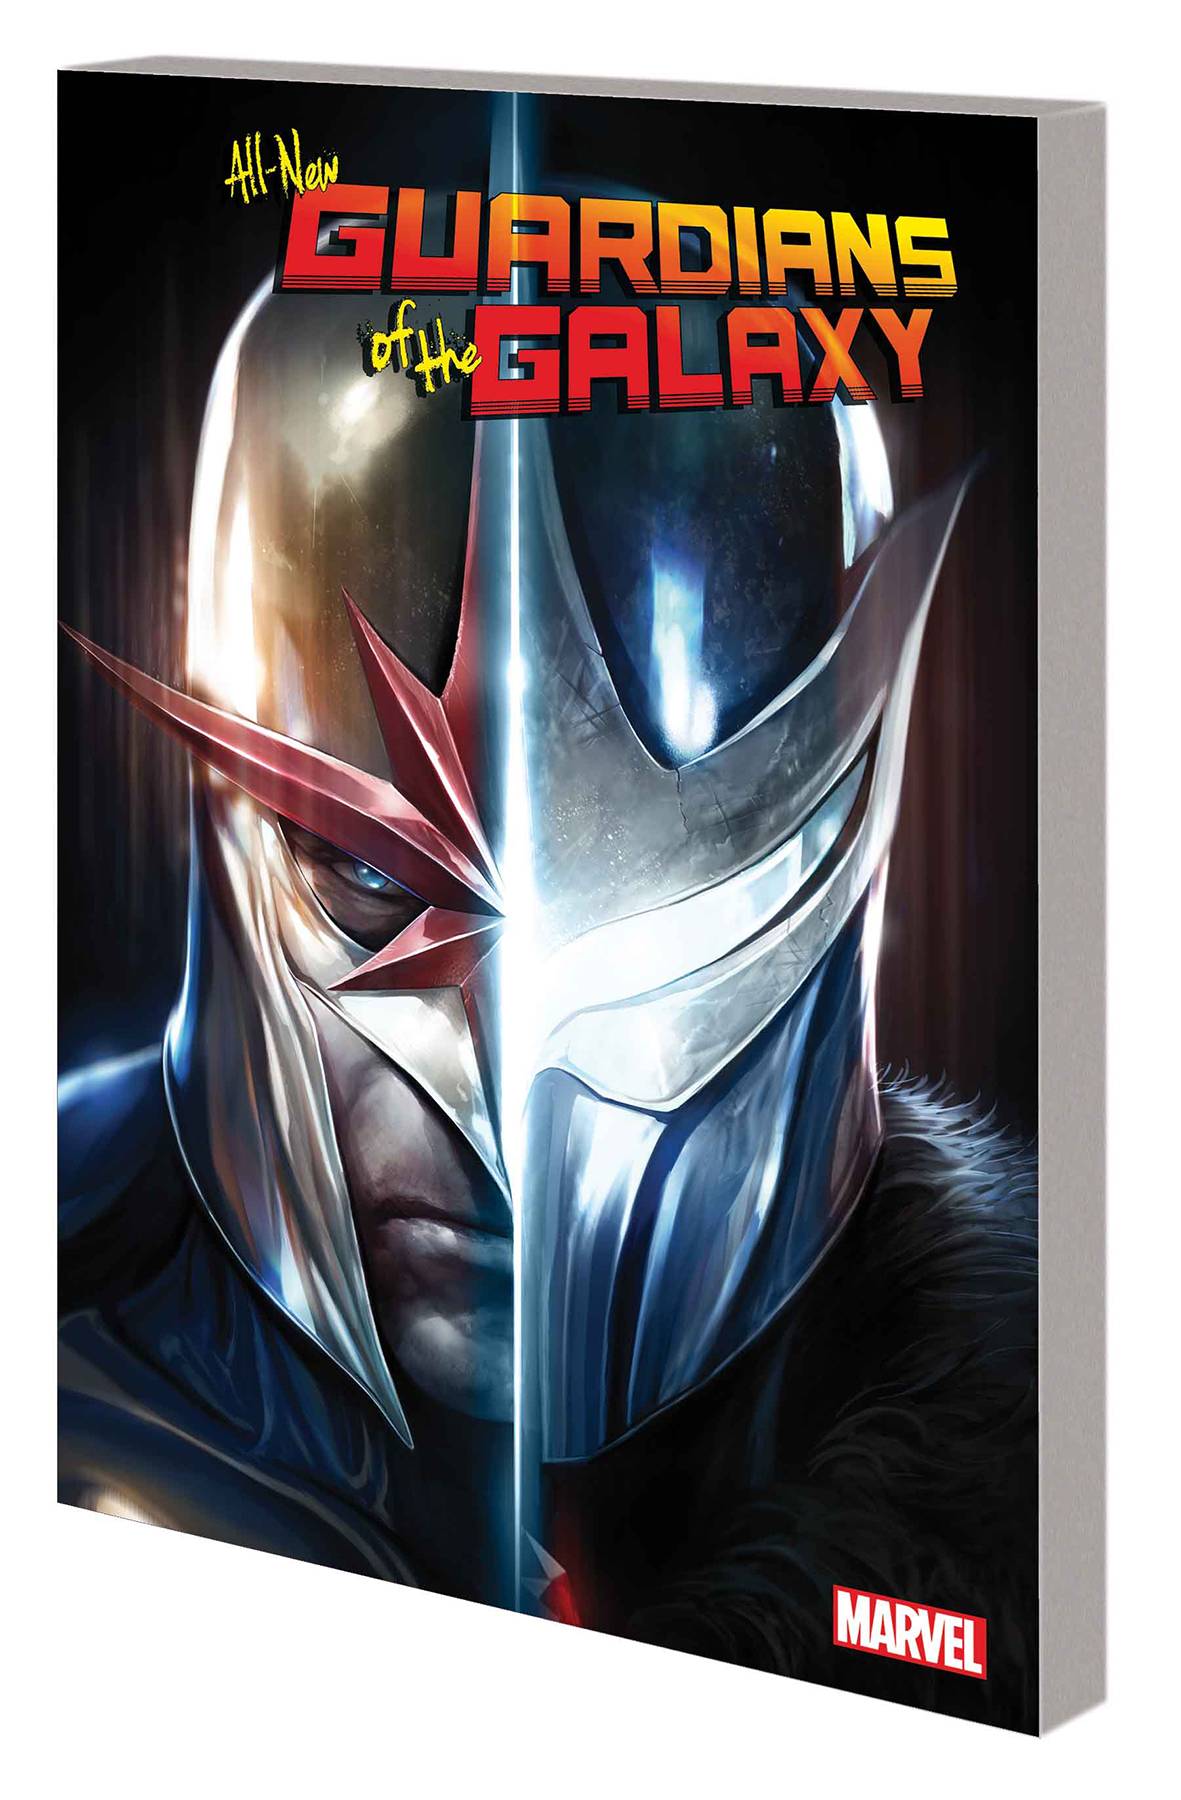 All New Guardians of Galaxy Graphic Novel Volume 2 Riders In Sky